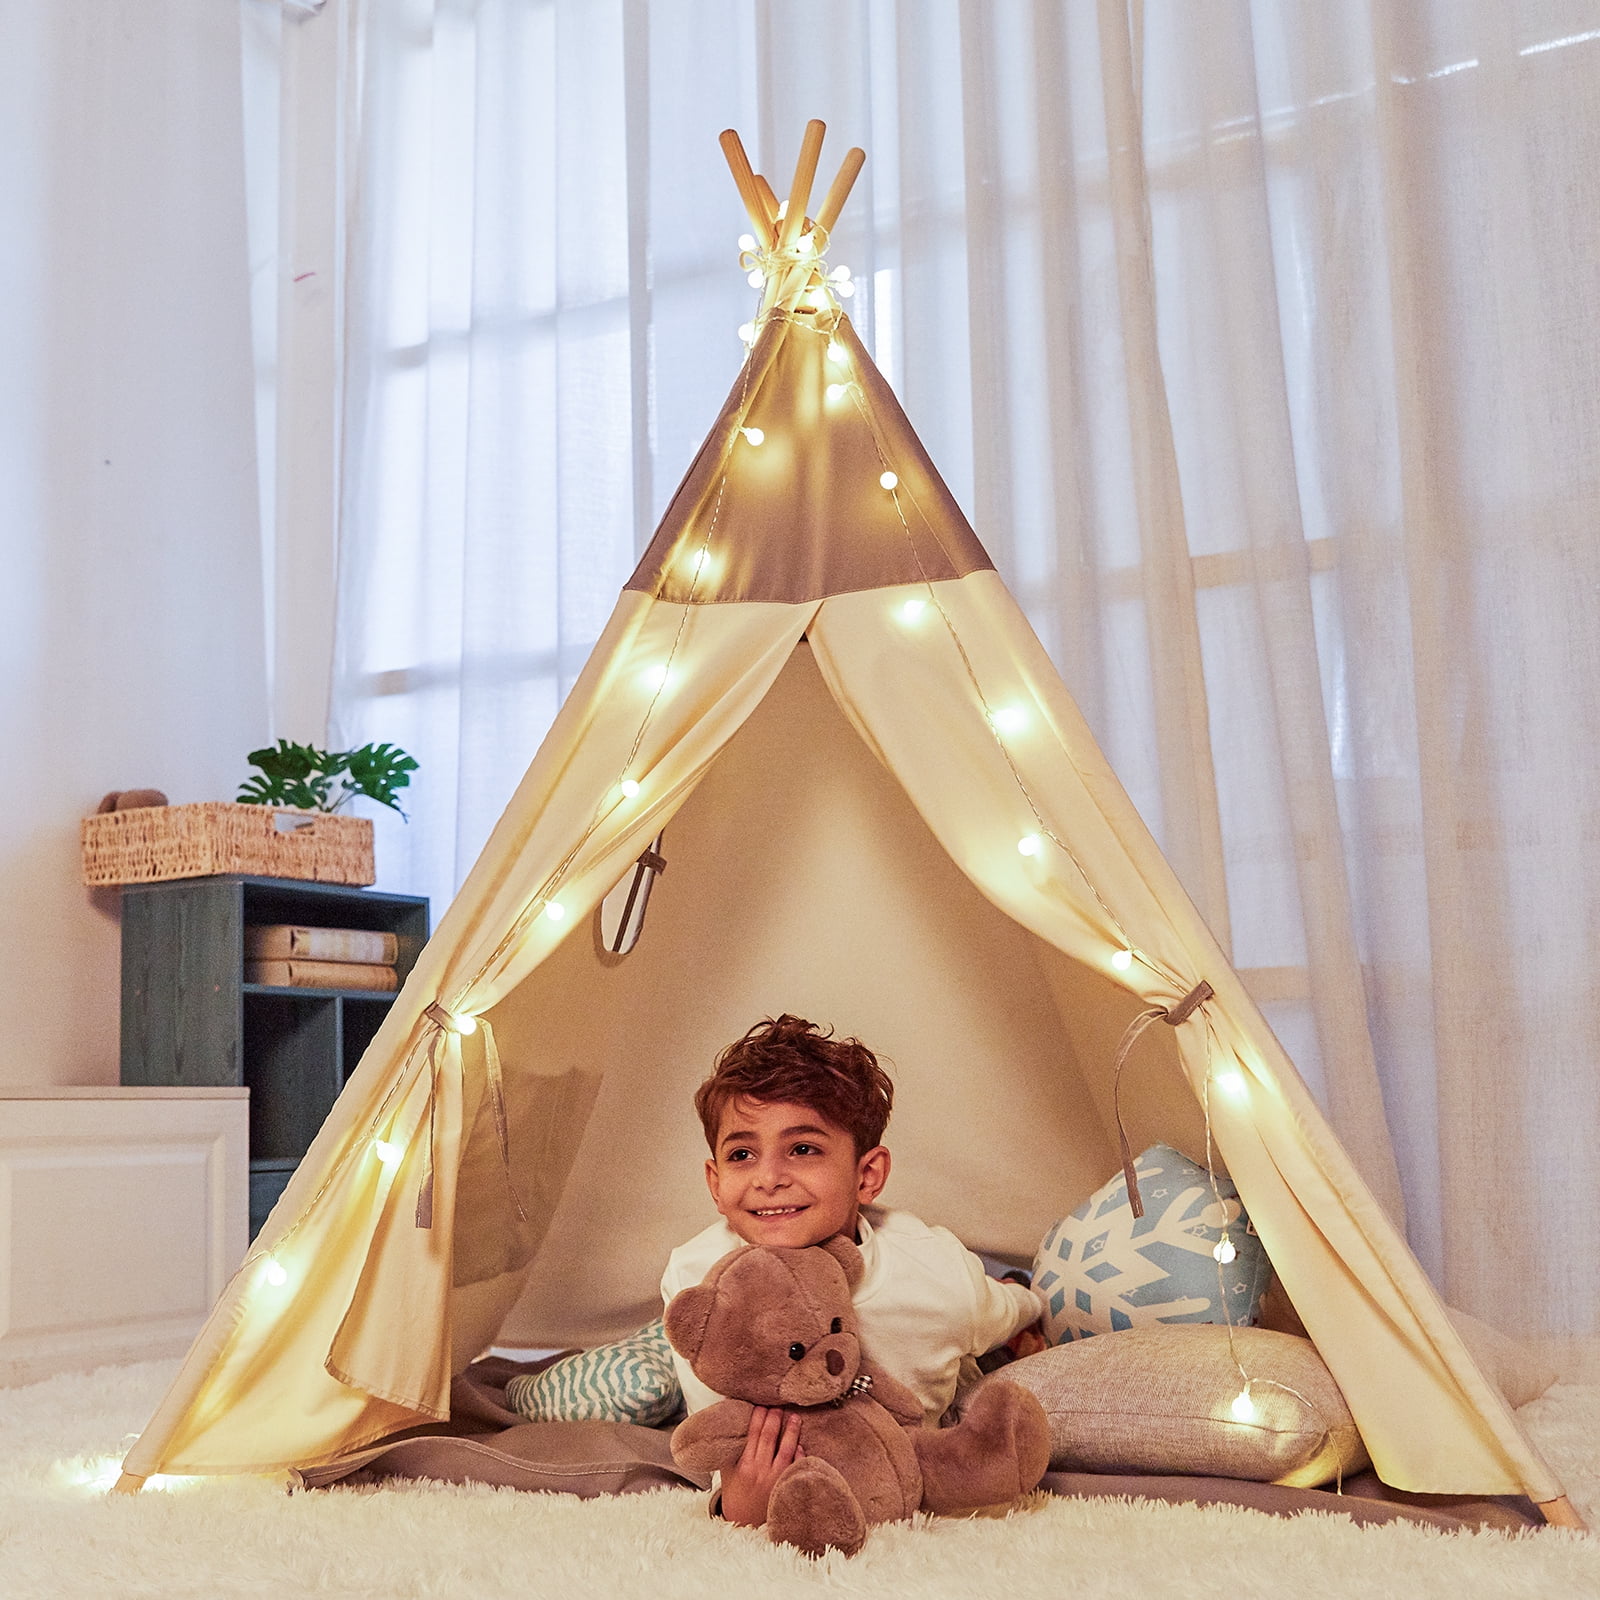 Kids Lace Teepee Tent Folding Children Playhouse W/Bag Home Outdoor Christmas 